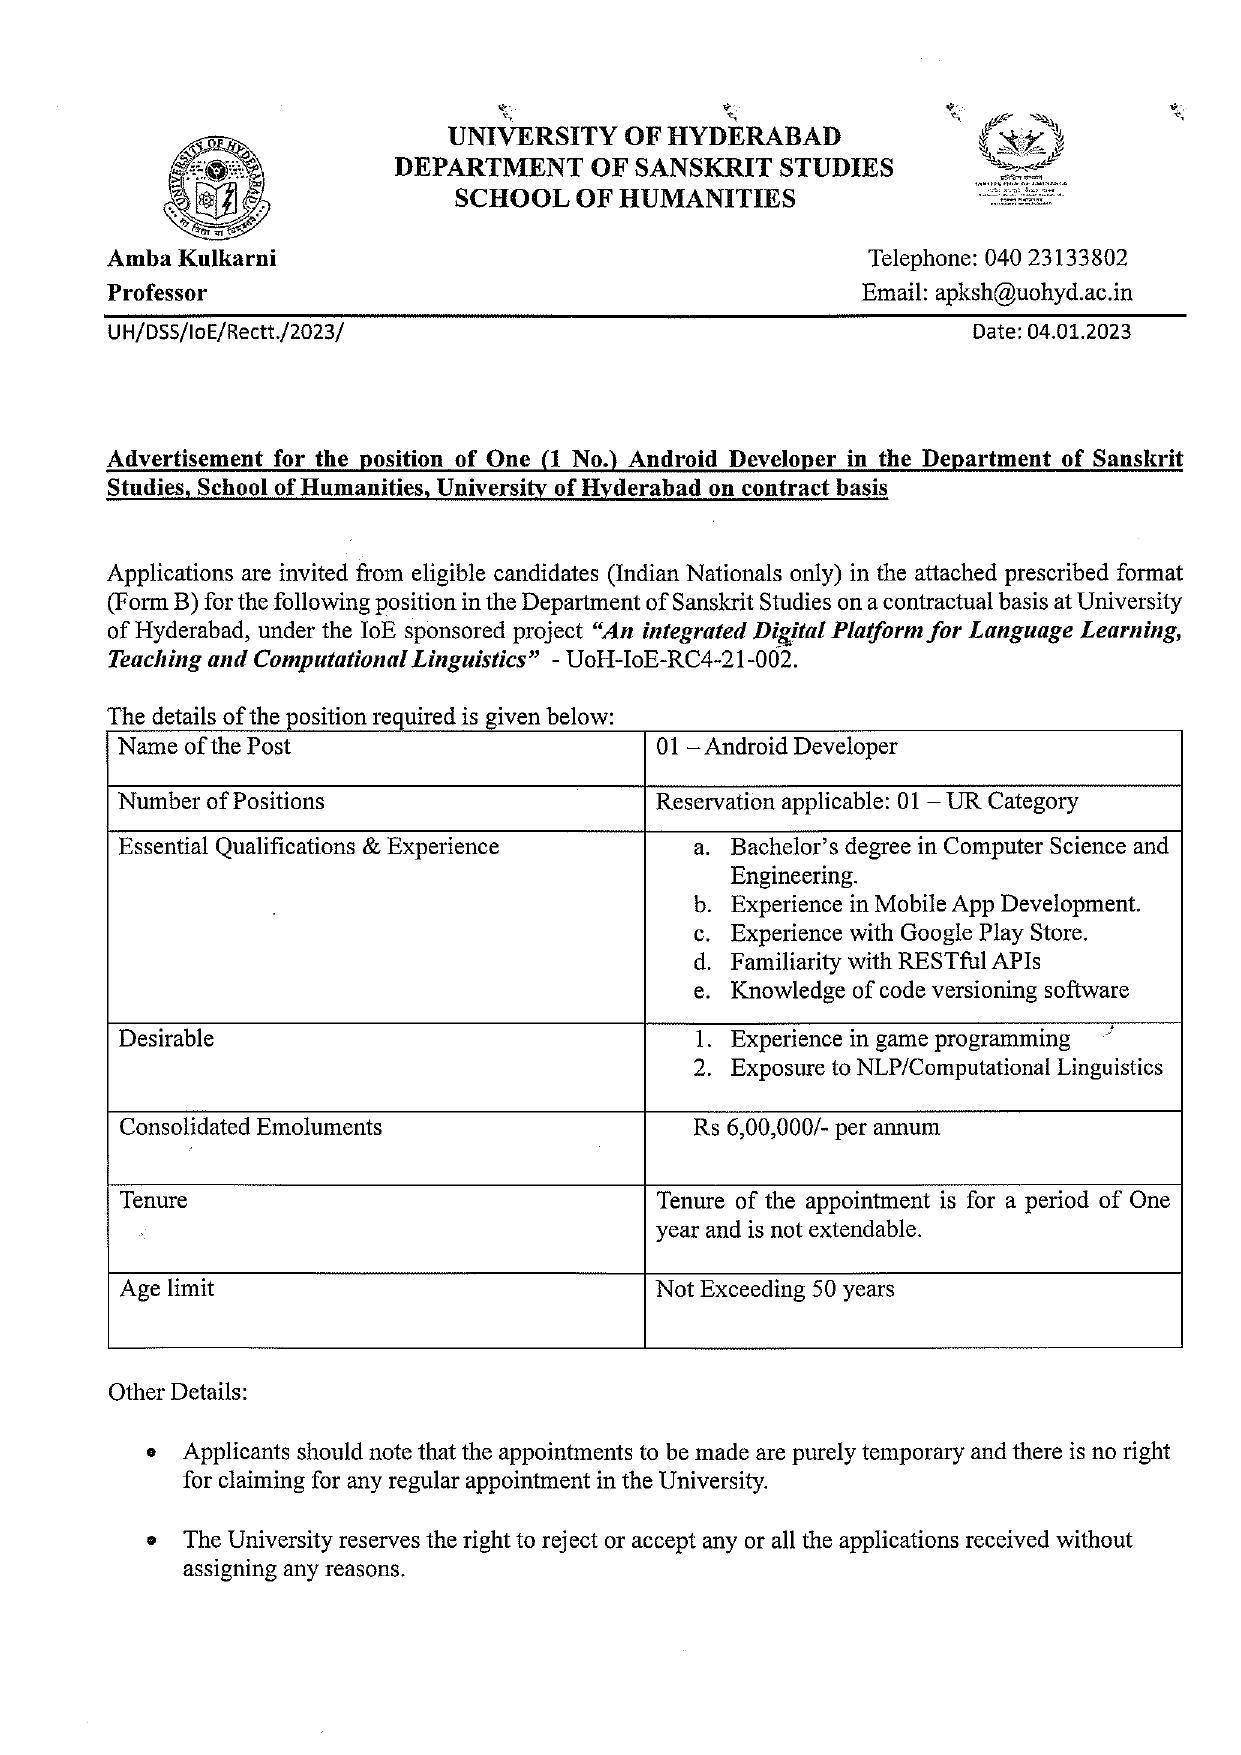 University of Hyderabad (UoH) Invites Application for Android Developer Recruitment 2023 - Page 3